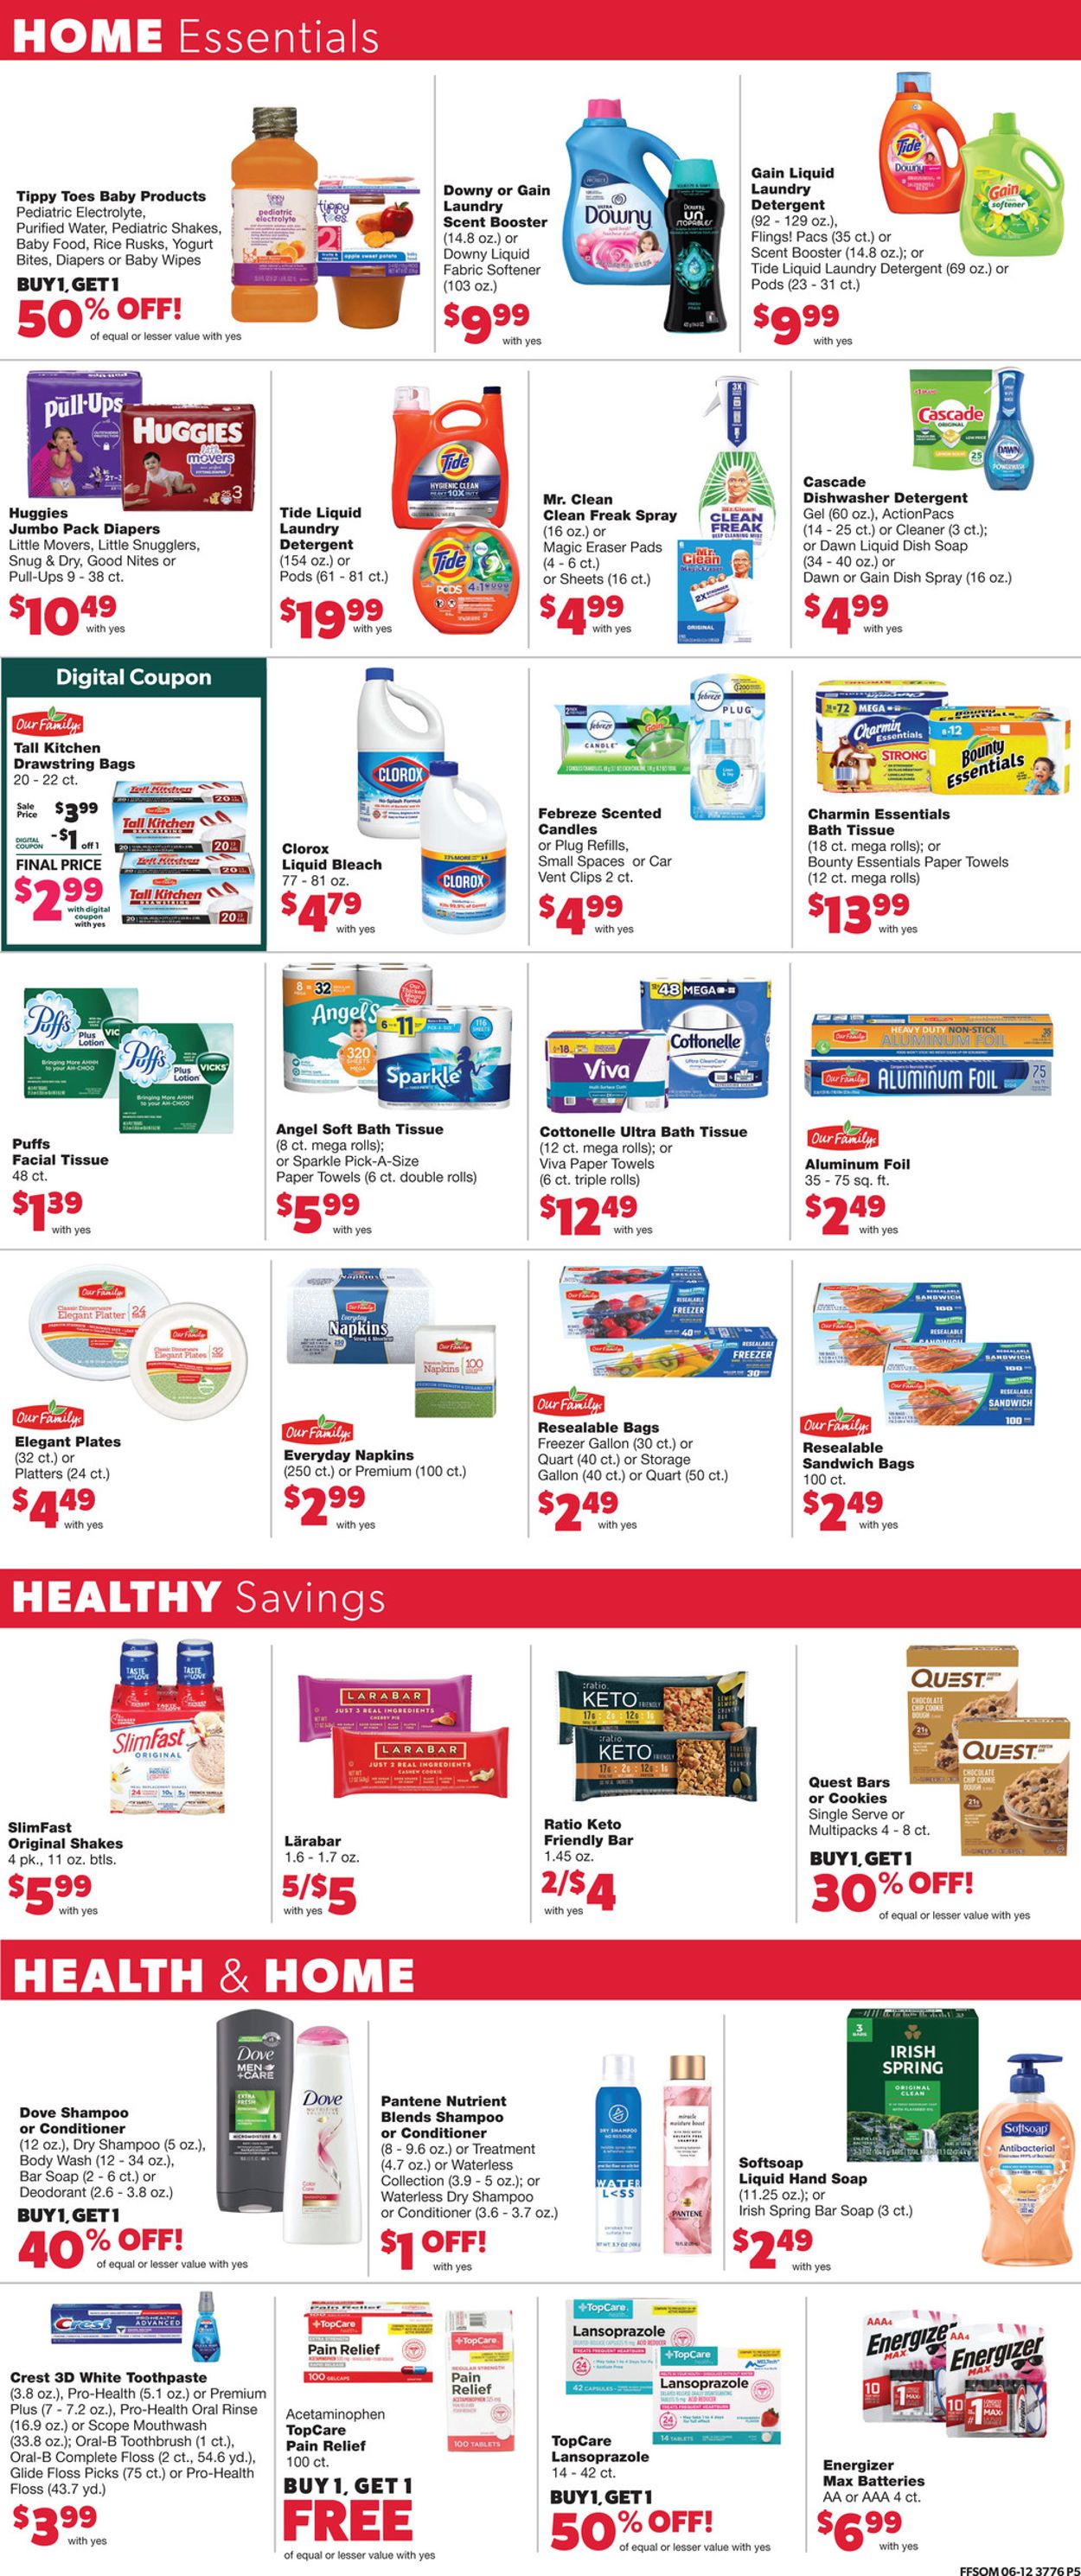 Family Fare Ad from 06/15/2022